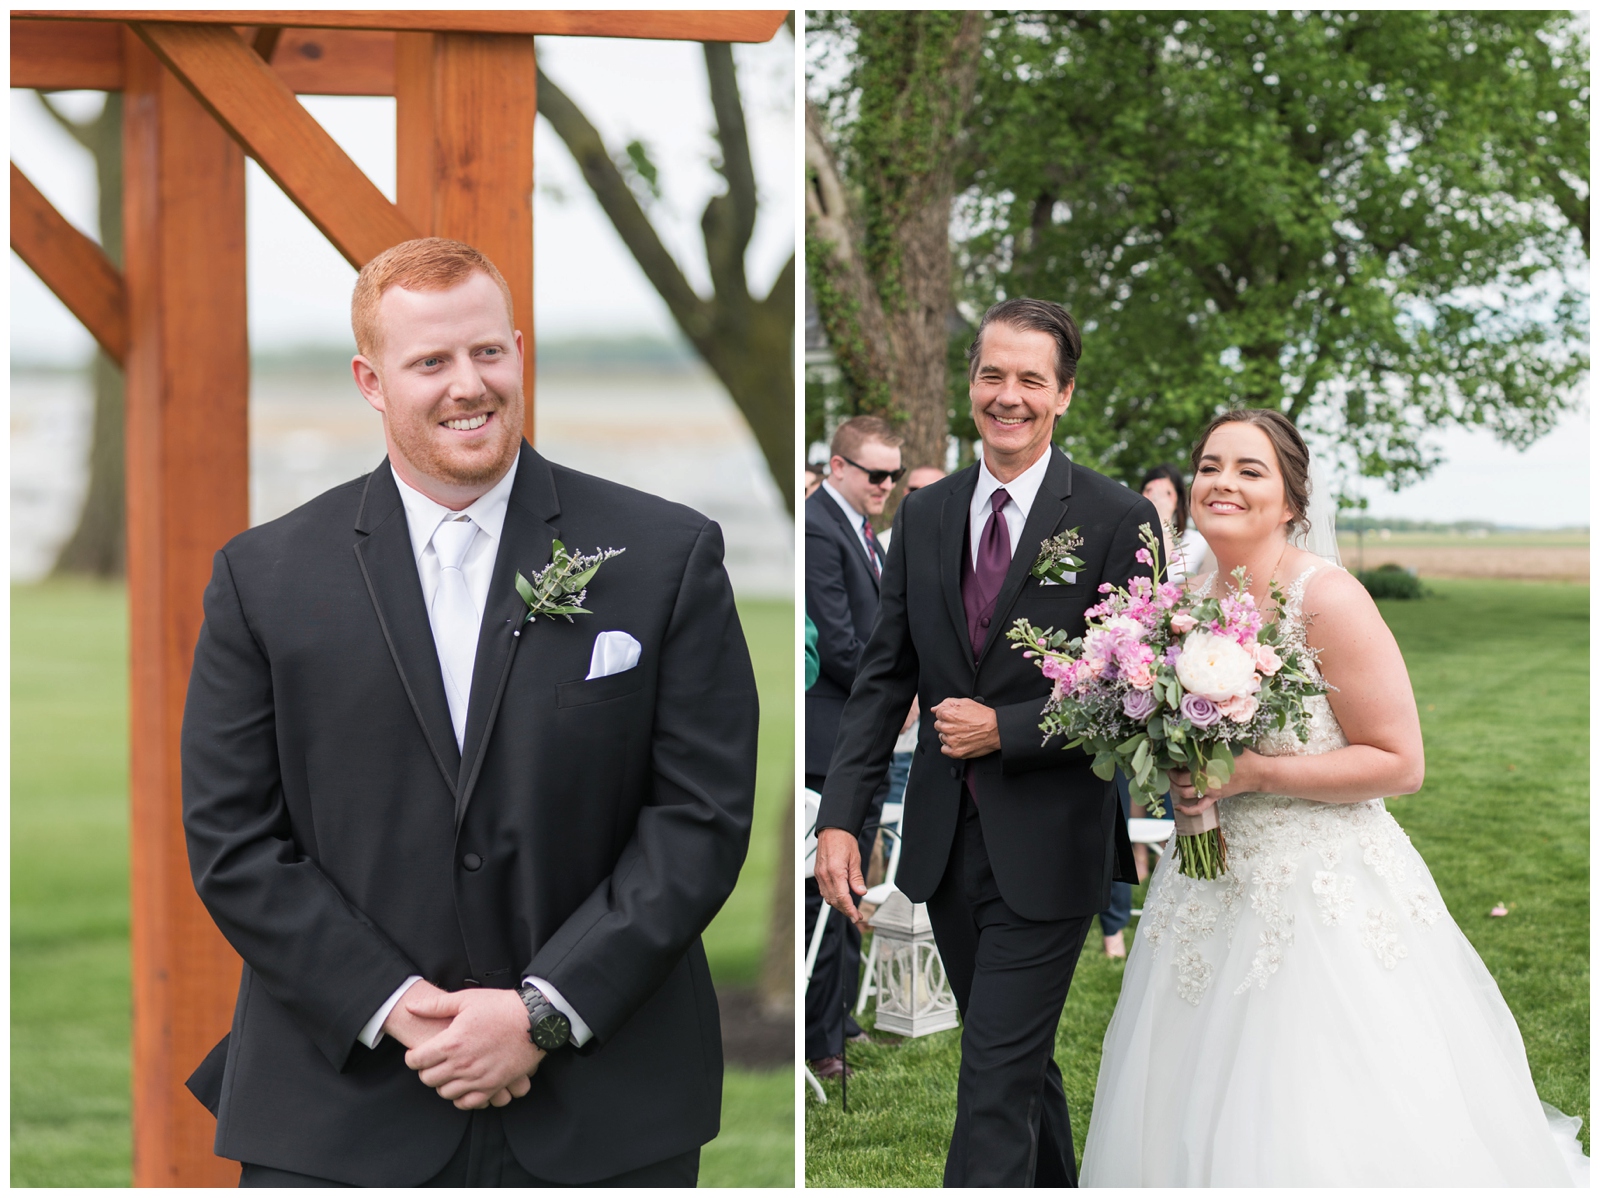 groom watches bride walk down aisle with dad during outdoor wedding ceremony at Pretty Prairie Farms